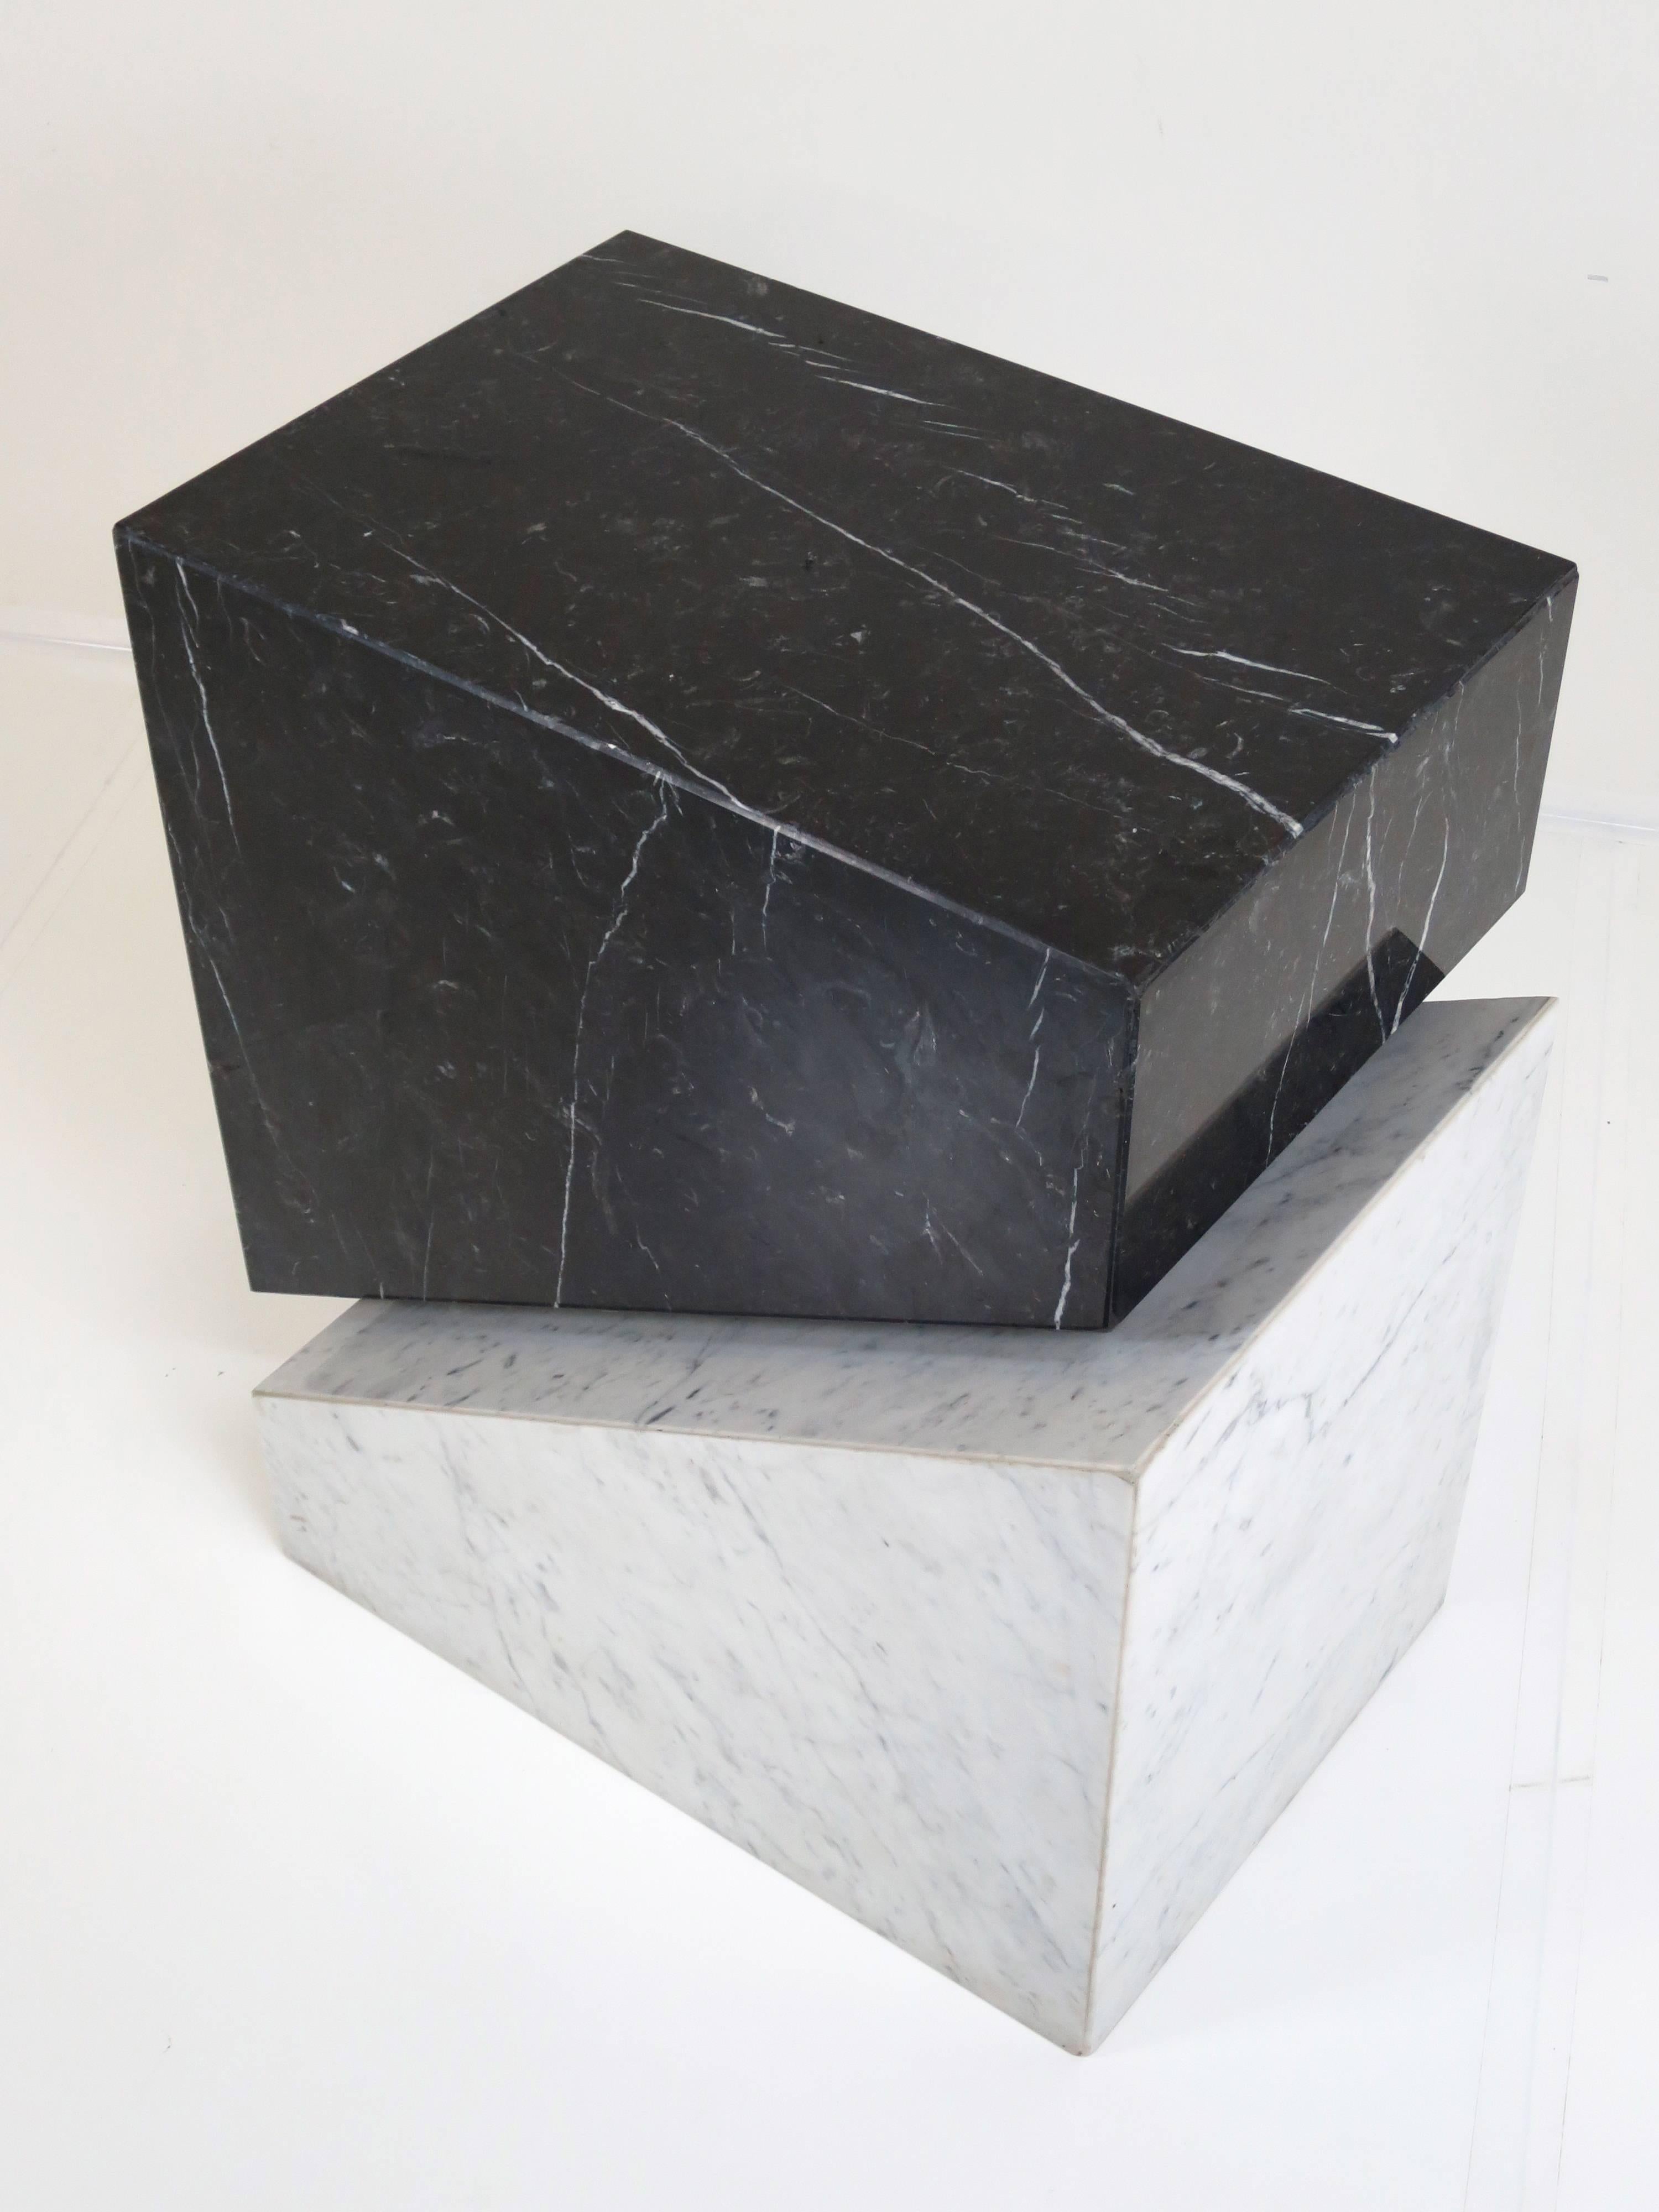 Incredibly heavy Italian marble table or table base. This piece is sculptural enough to be used as a large side table, utilitarian enough to function as a pedestal, and substantial enough to work as a dining table base. Contrasting black and white